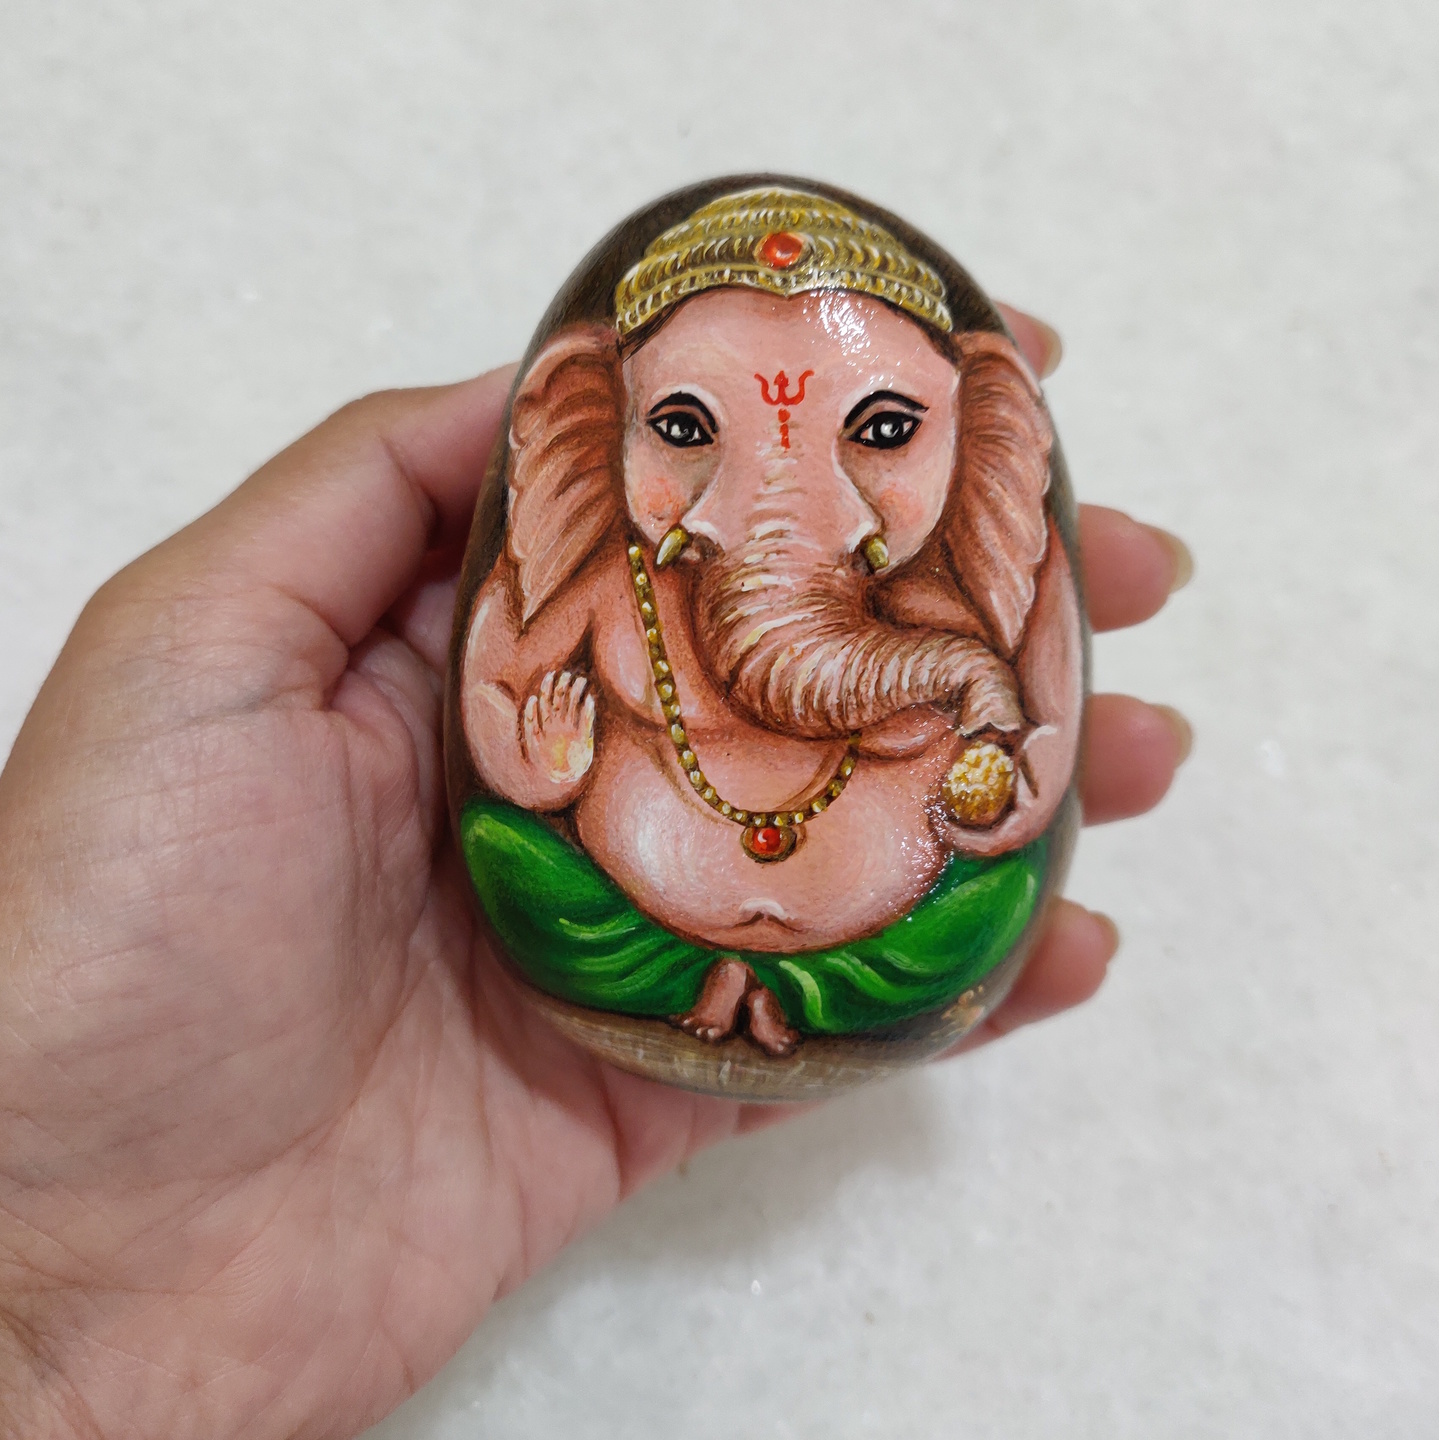 Lord Ganesha sitting in a conch shell hand painted on a rock for diwali